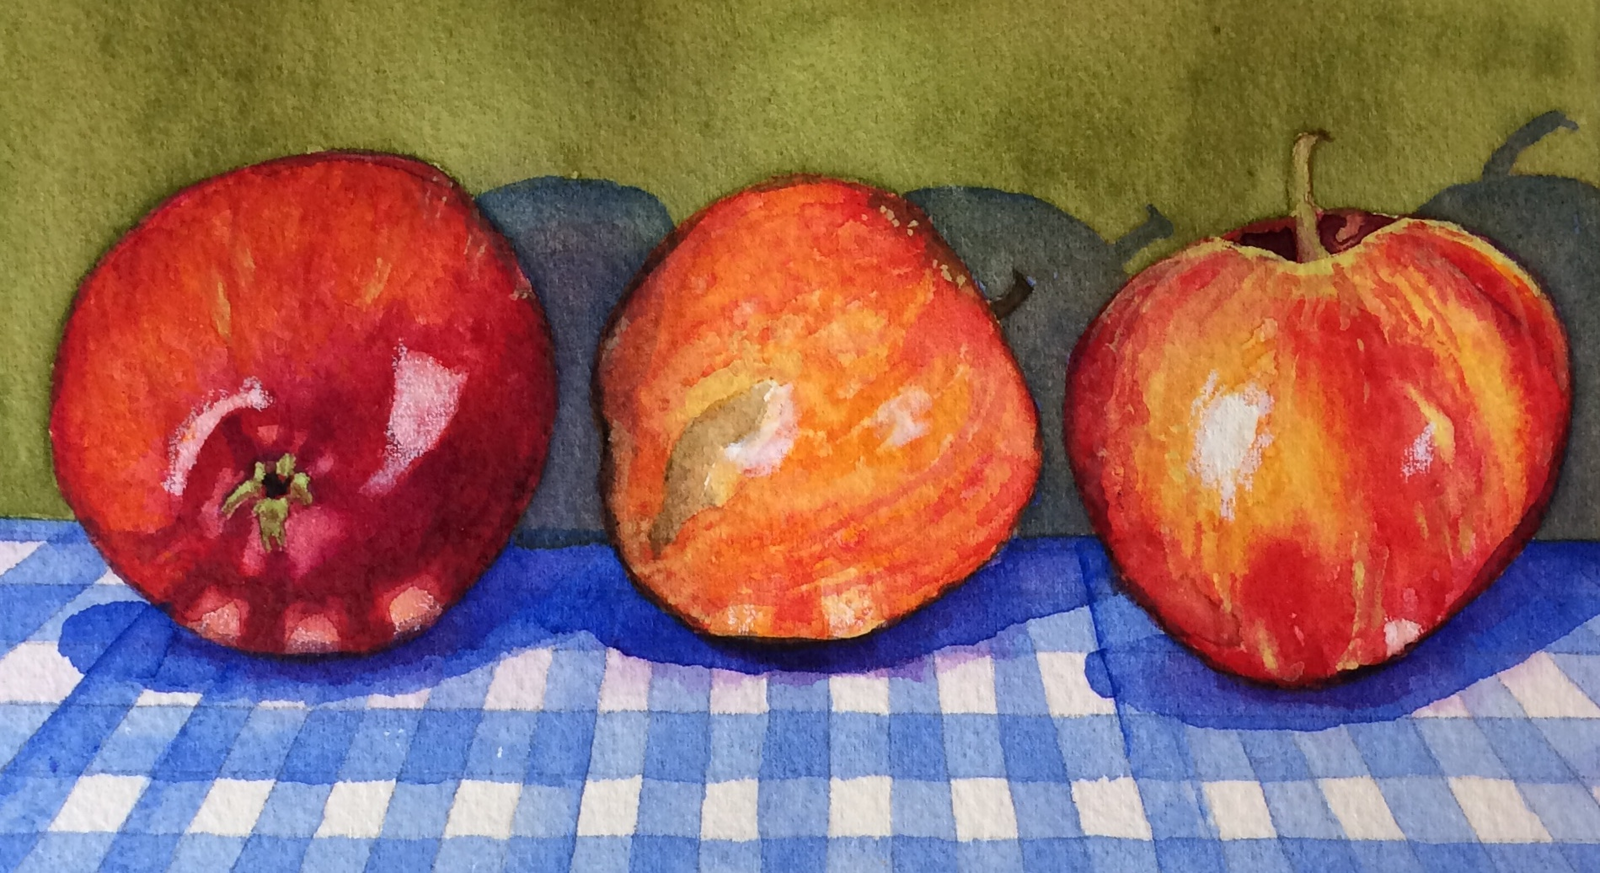 Apples - sold